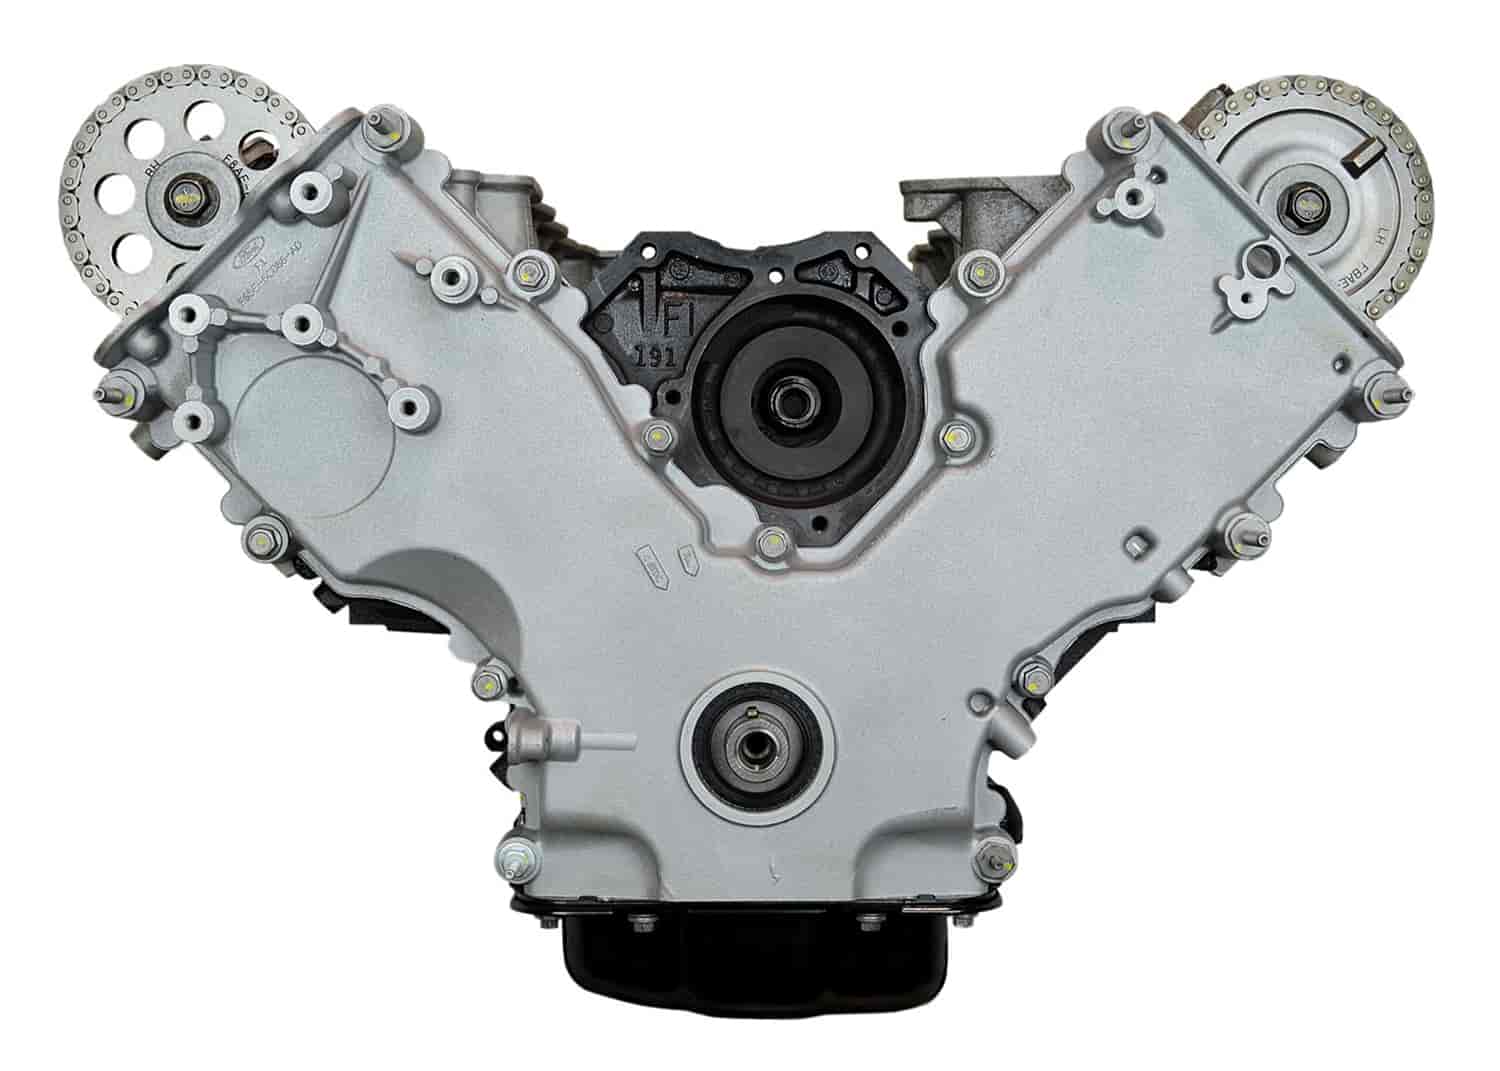 Remanufactured Crate Engine for 2001 Ford E-Series Van with 4.6L V8